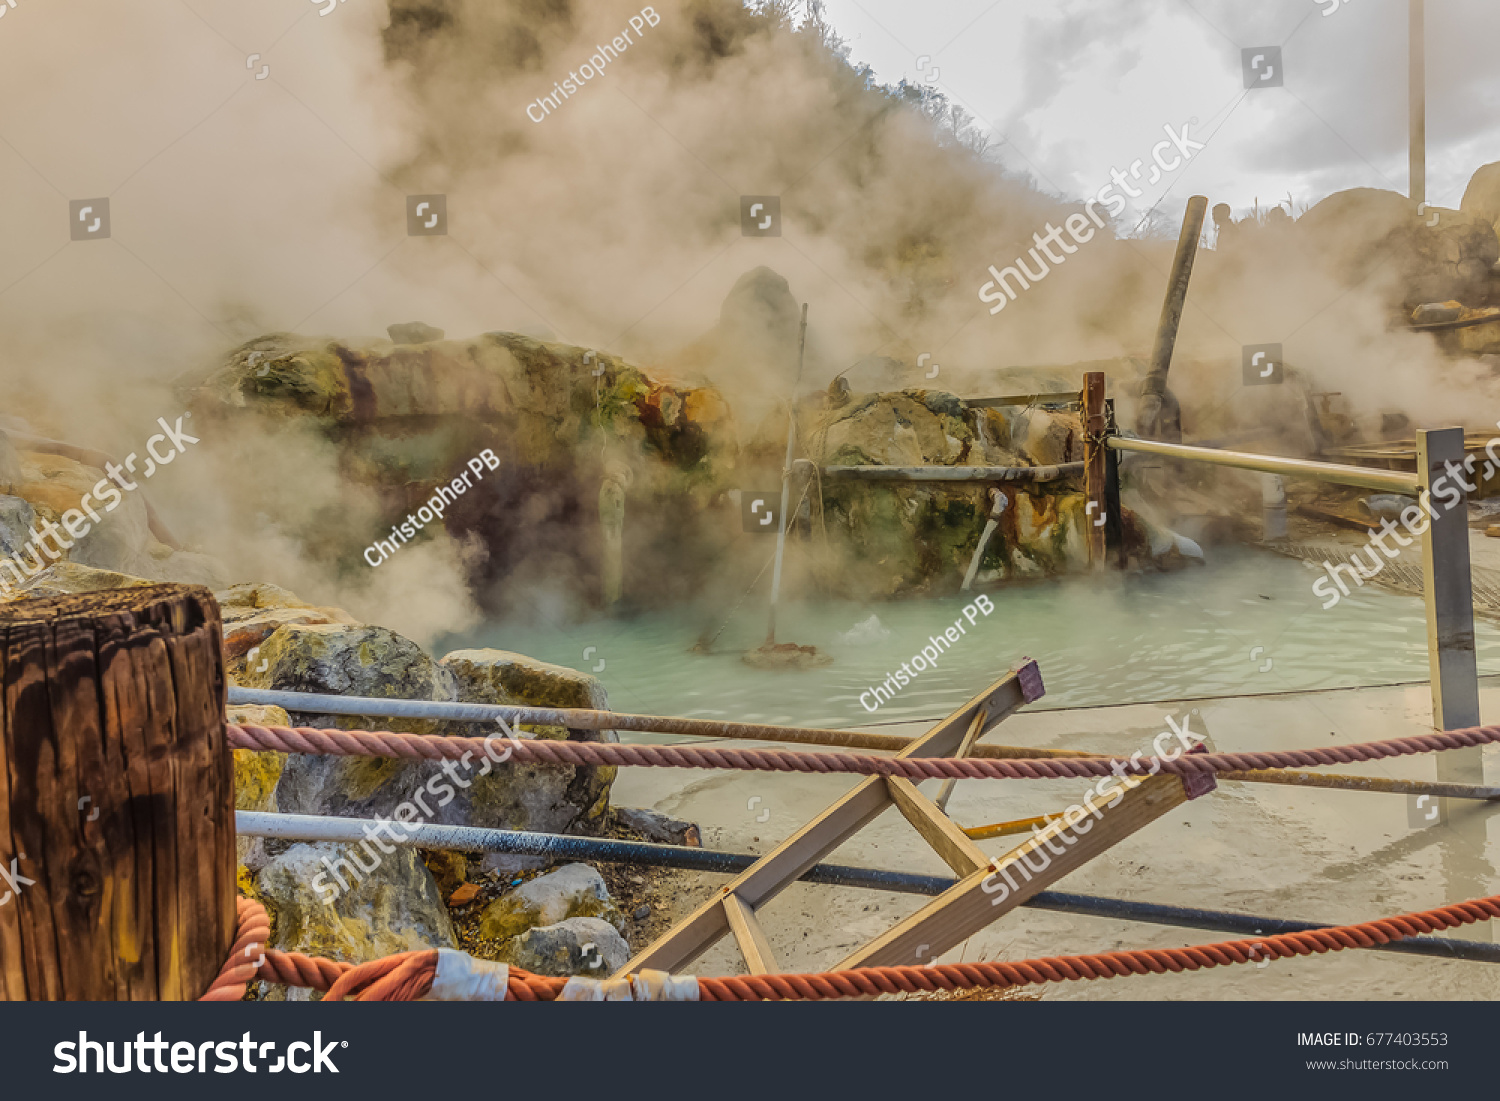 Owakudani hot spring pond with misty and active sulfur vents is popular scenic views, volcano activity and black eggs boiled in hot springs at Hakone, Japan. #677403553